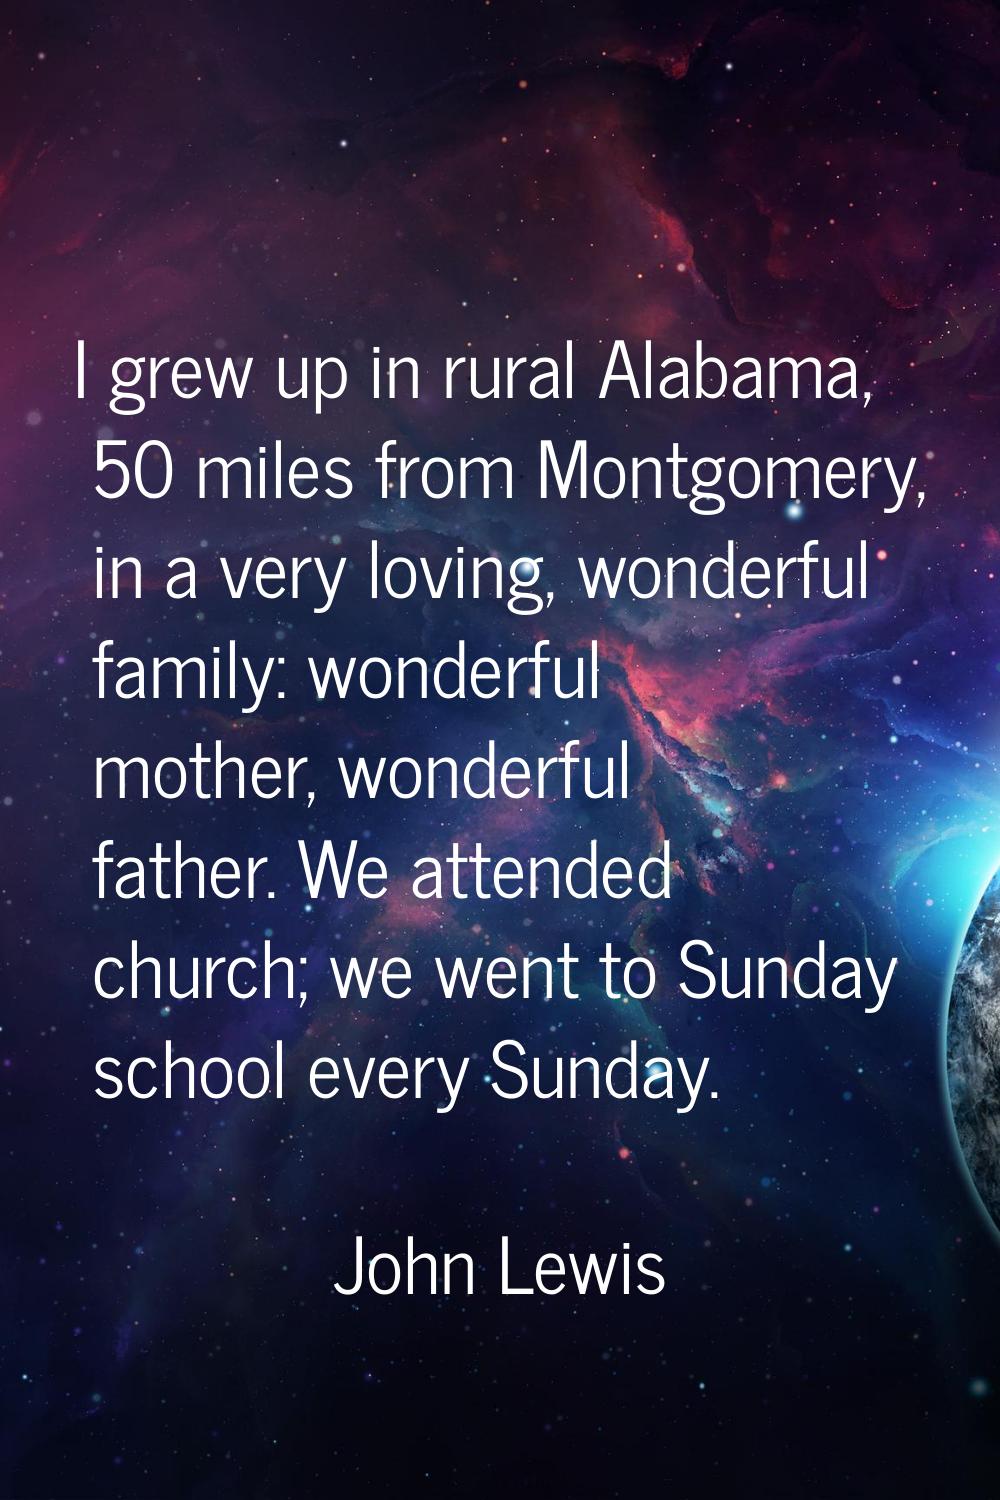 I grew up in rural Alabama, 50 miles from Montgomery, in a very loving, wonderful family: wonderful